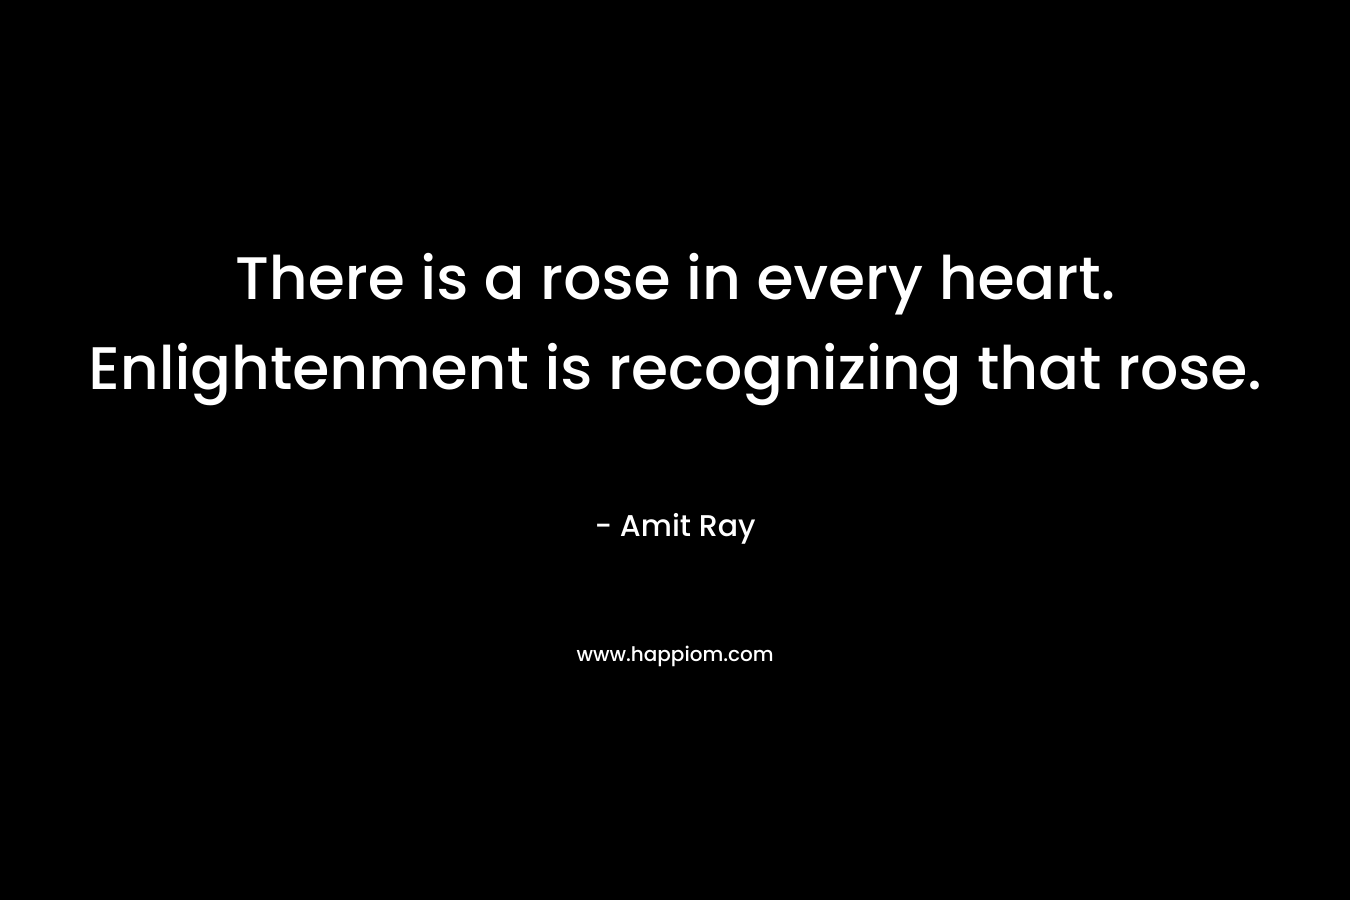 There is a rose in every heart. Enlightenment is recognizing that rose.